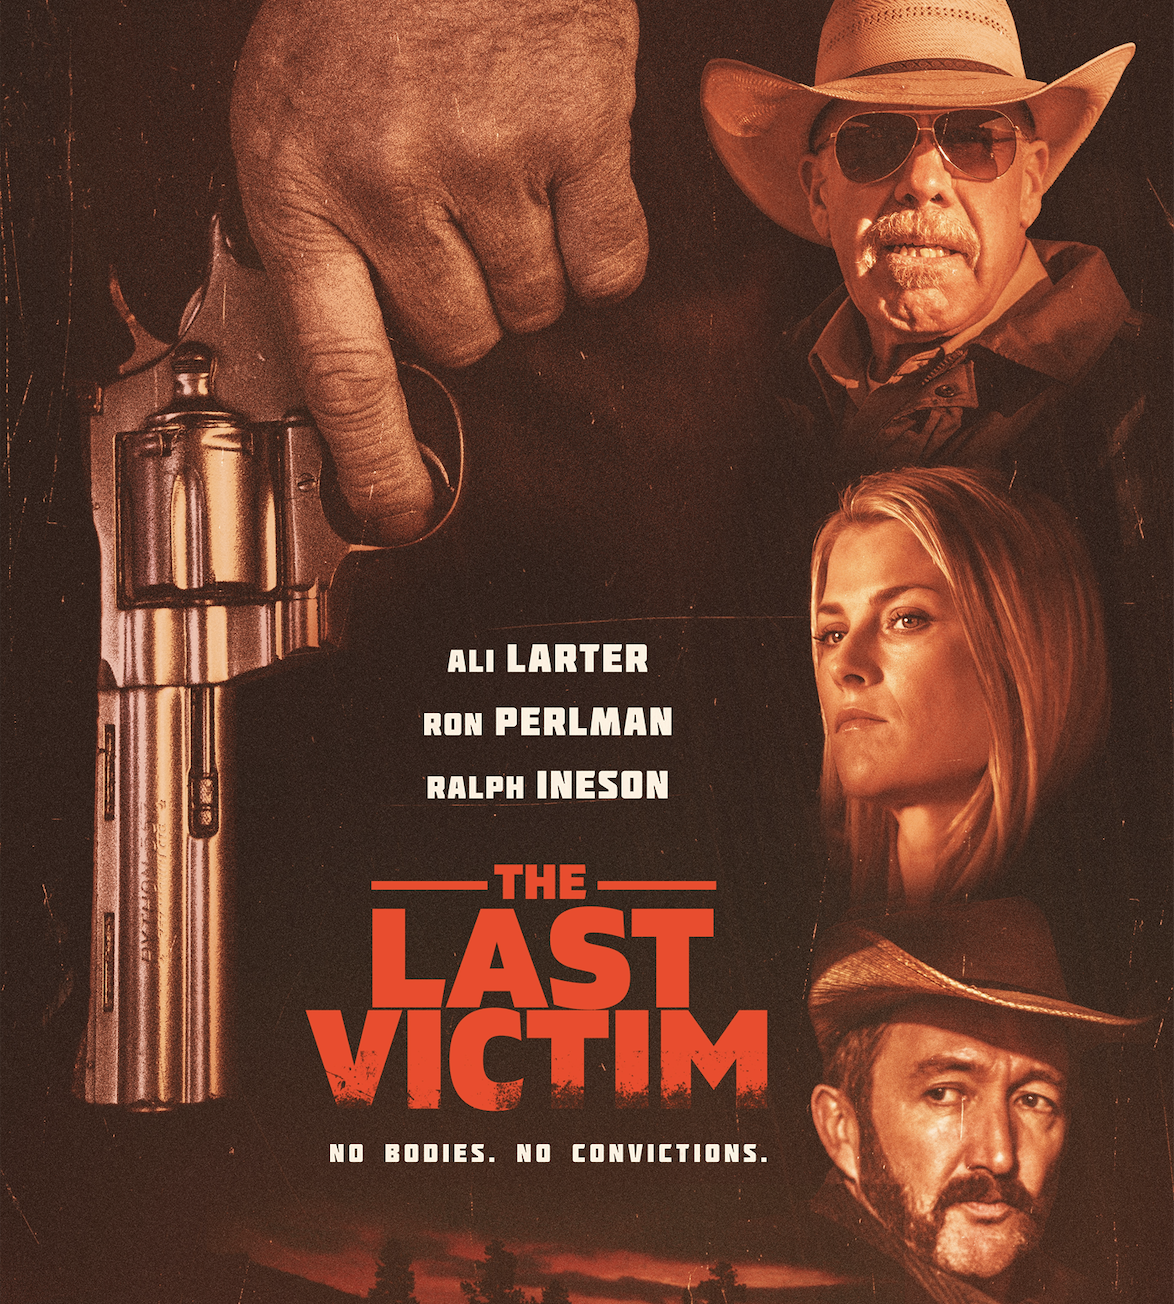 The Last Victim | Official Trailer And Poster